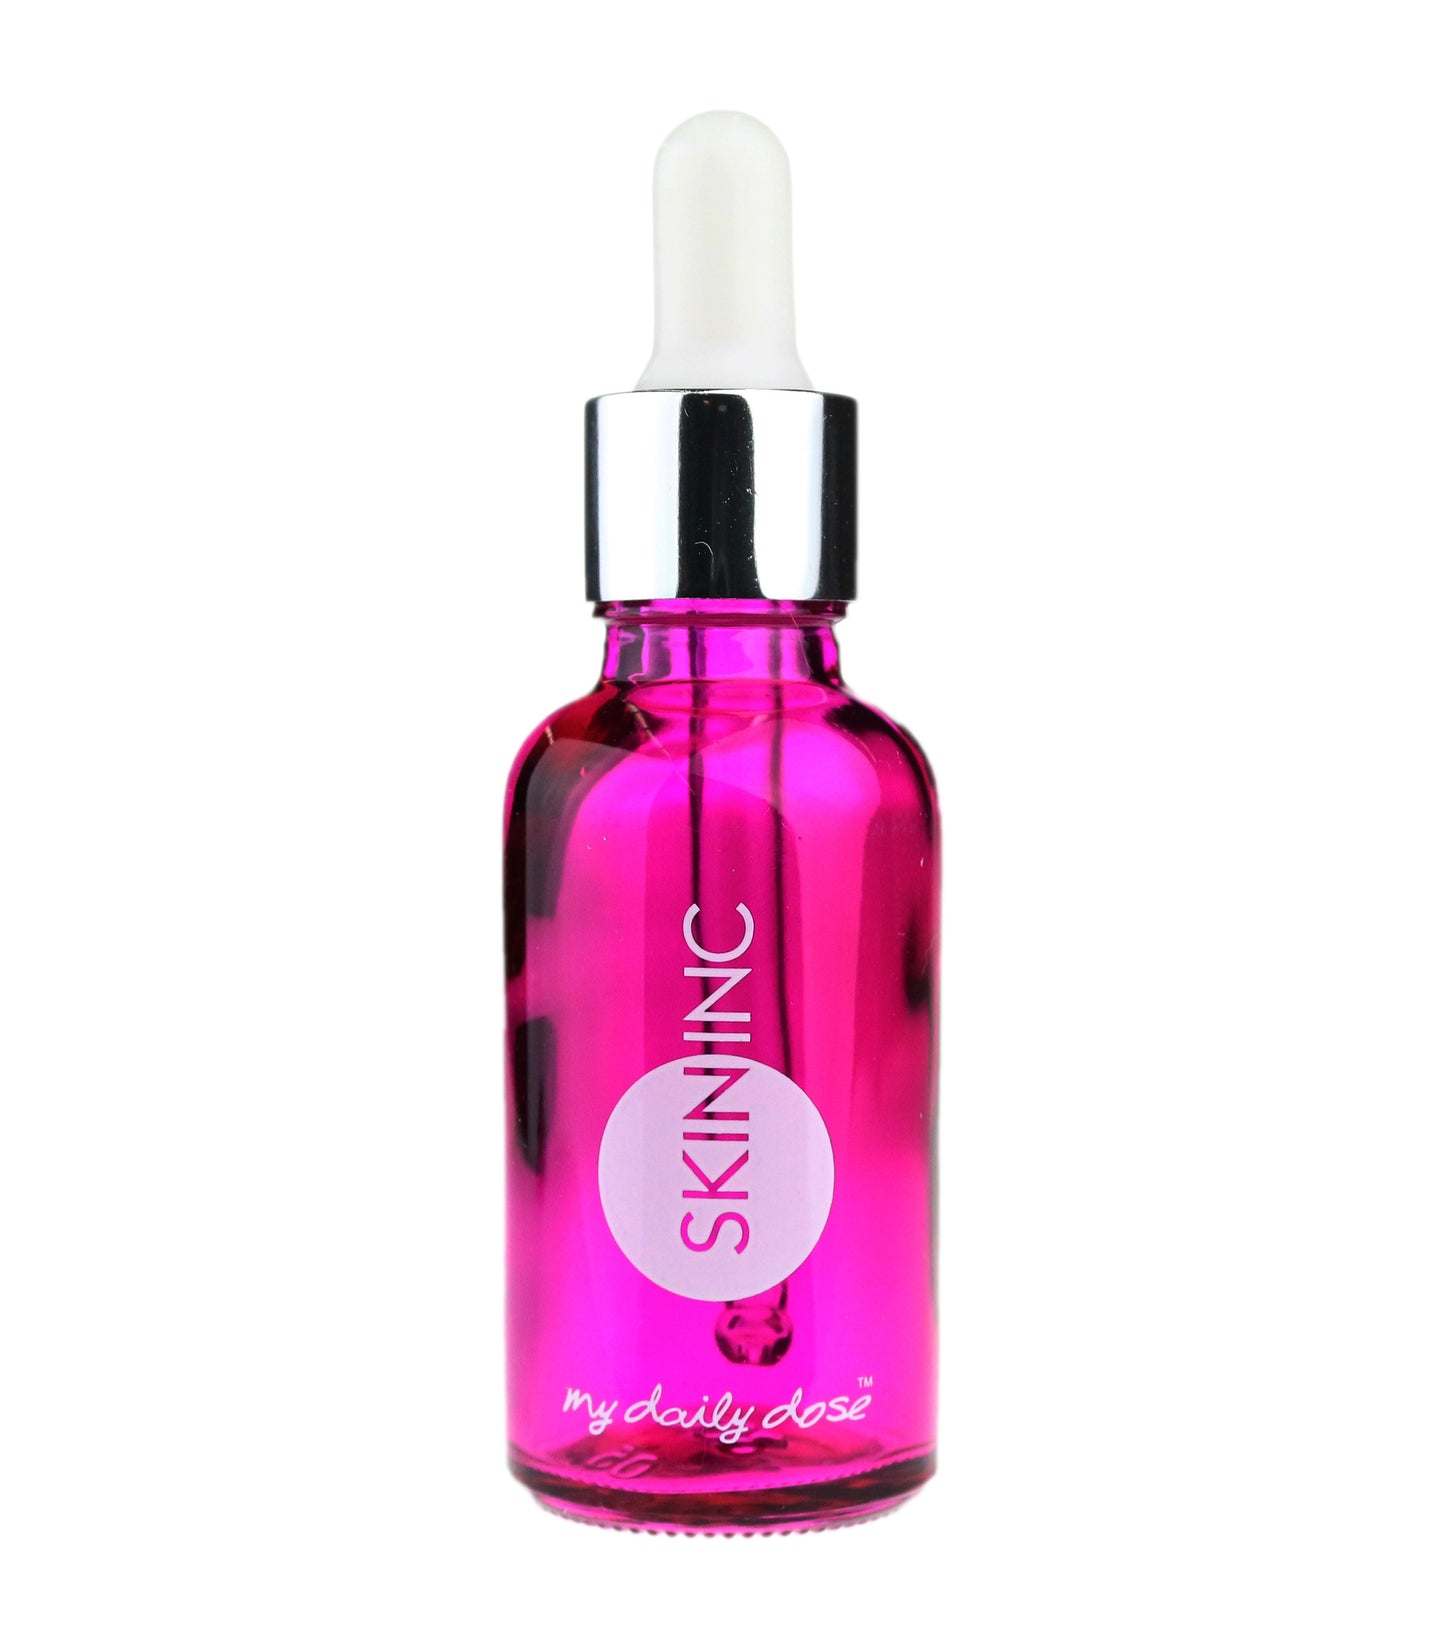 Skin Inc My Daily Dose Mixer Bottle My Daily Dose Mixer Bottle 30 ml